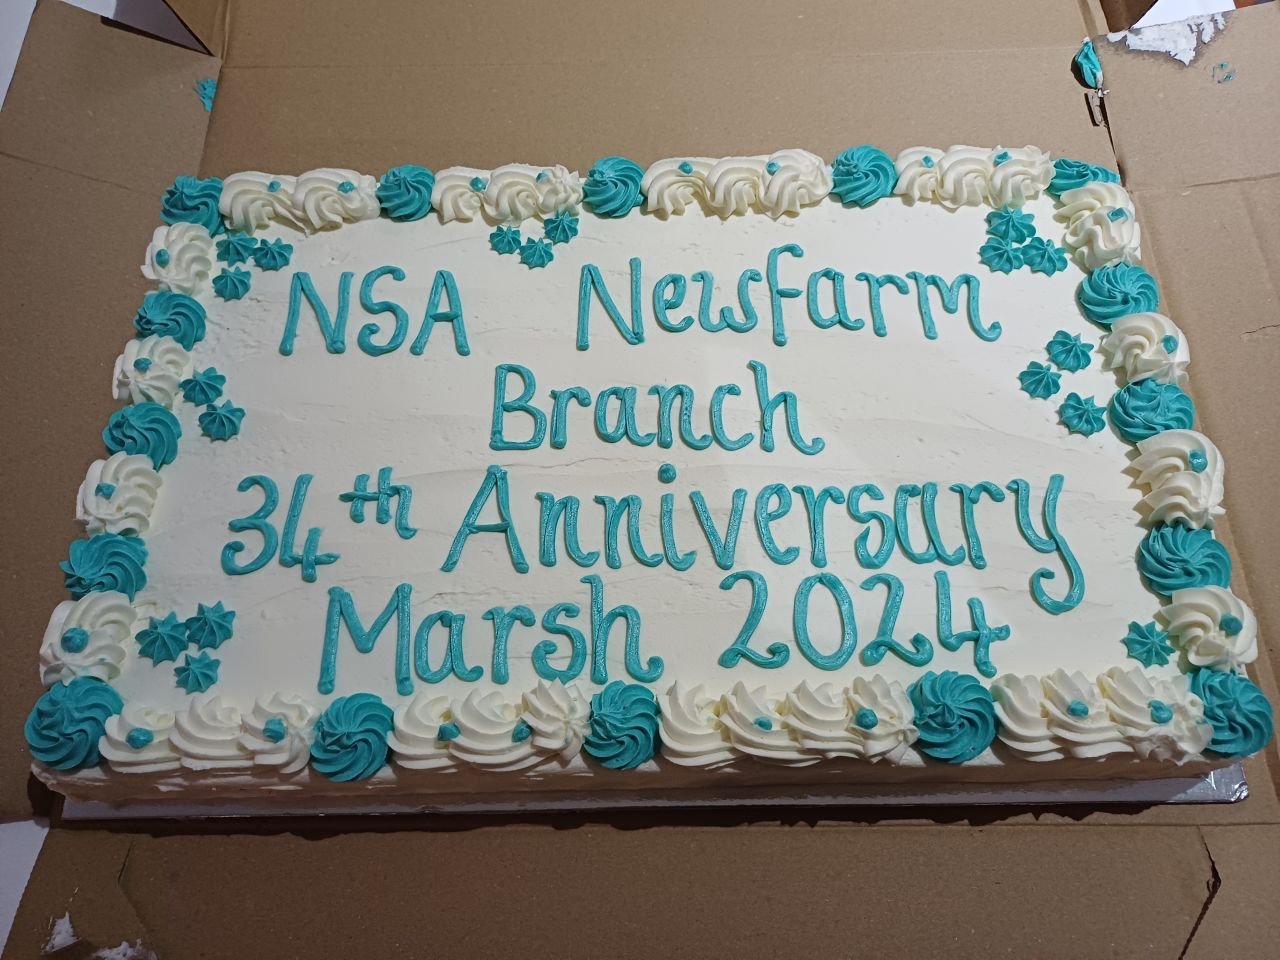 NSA New Farm Branch. 
Celebrating our 34th Anniversary, March  2024. Our thanks to Grace Grace for donating the cake from Bakeology.

Love the typo!!